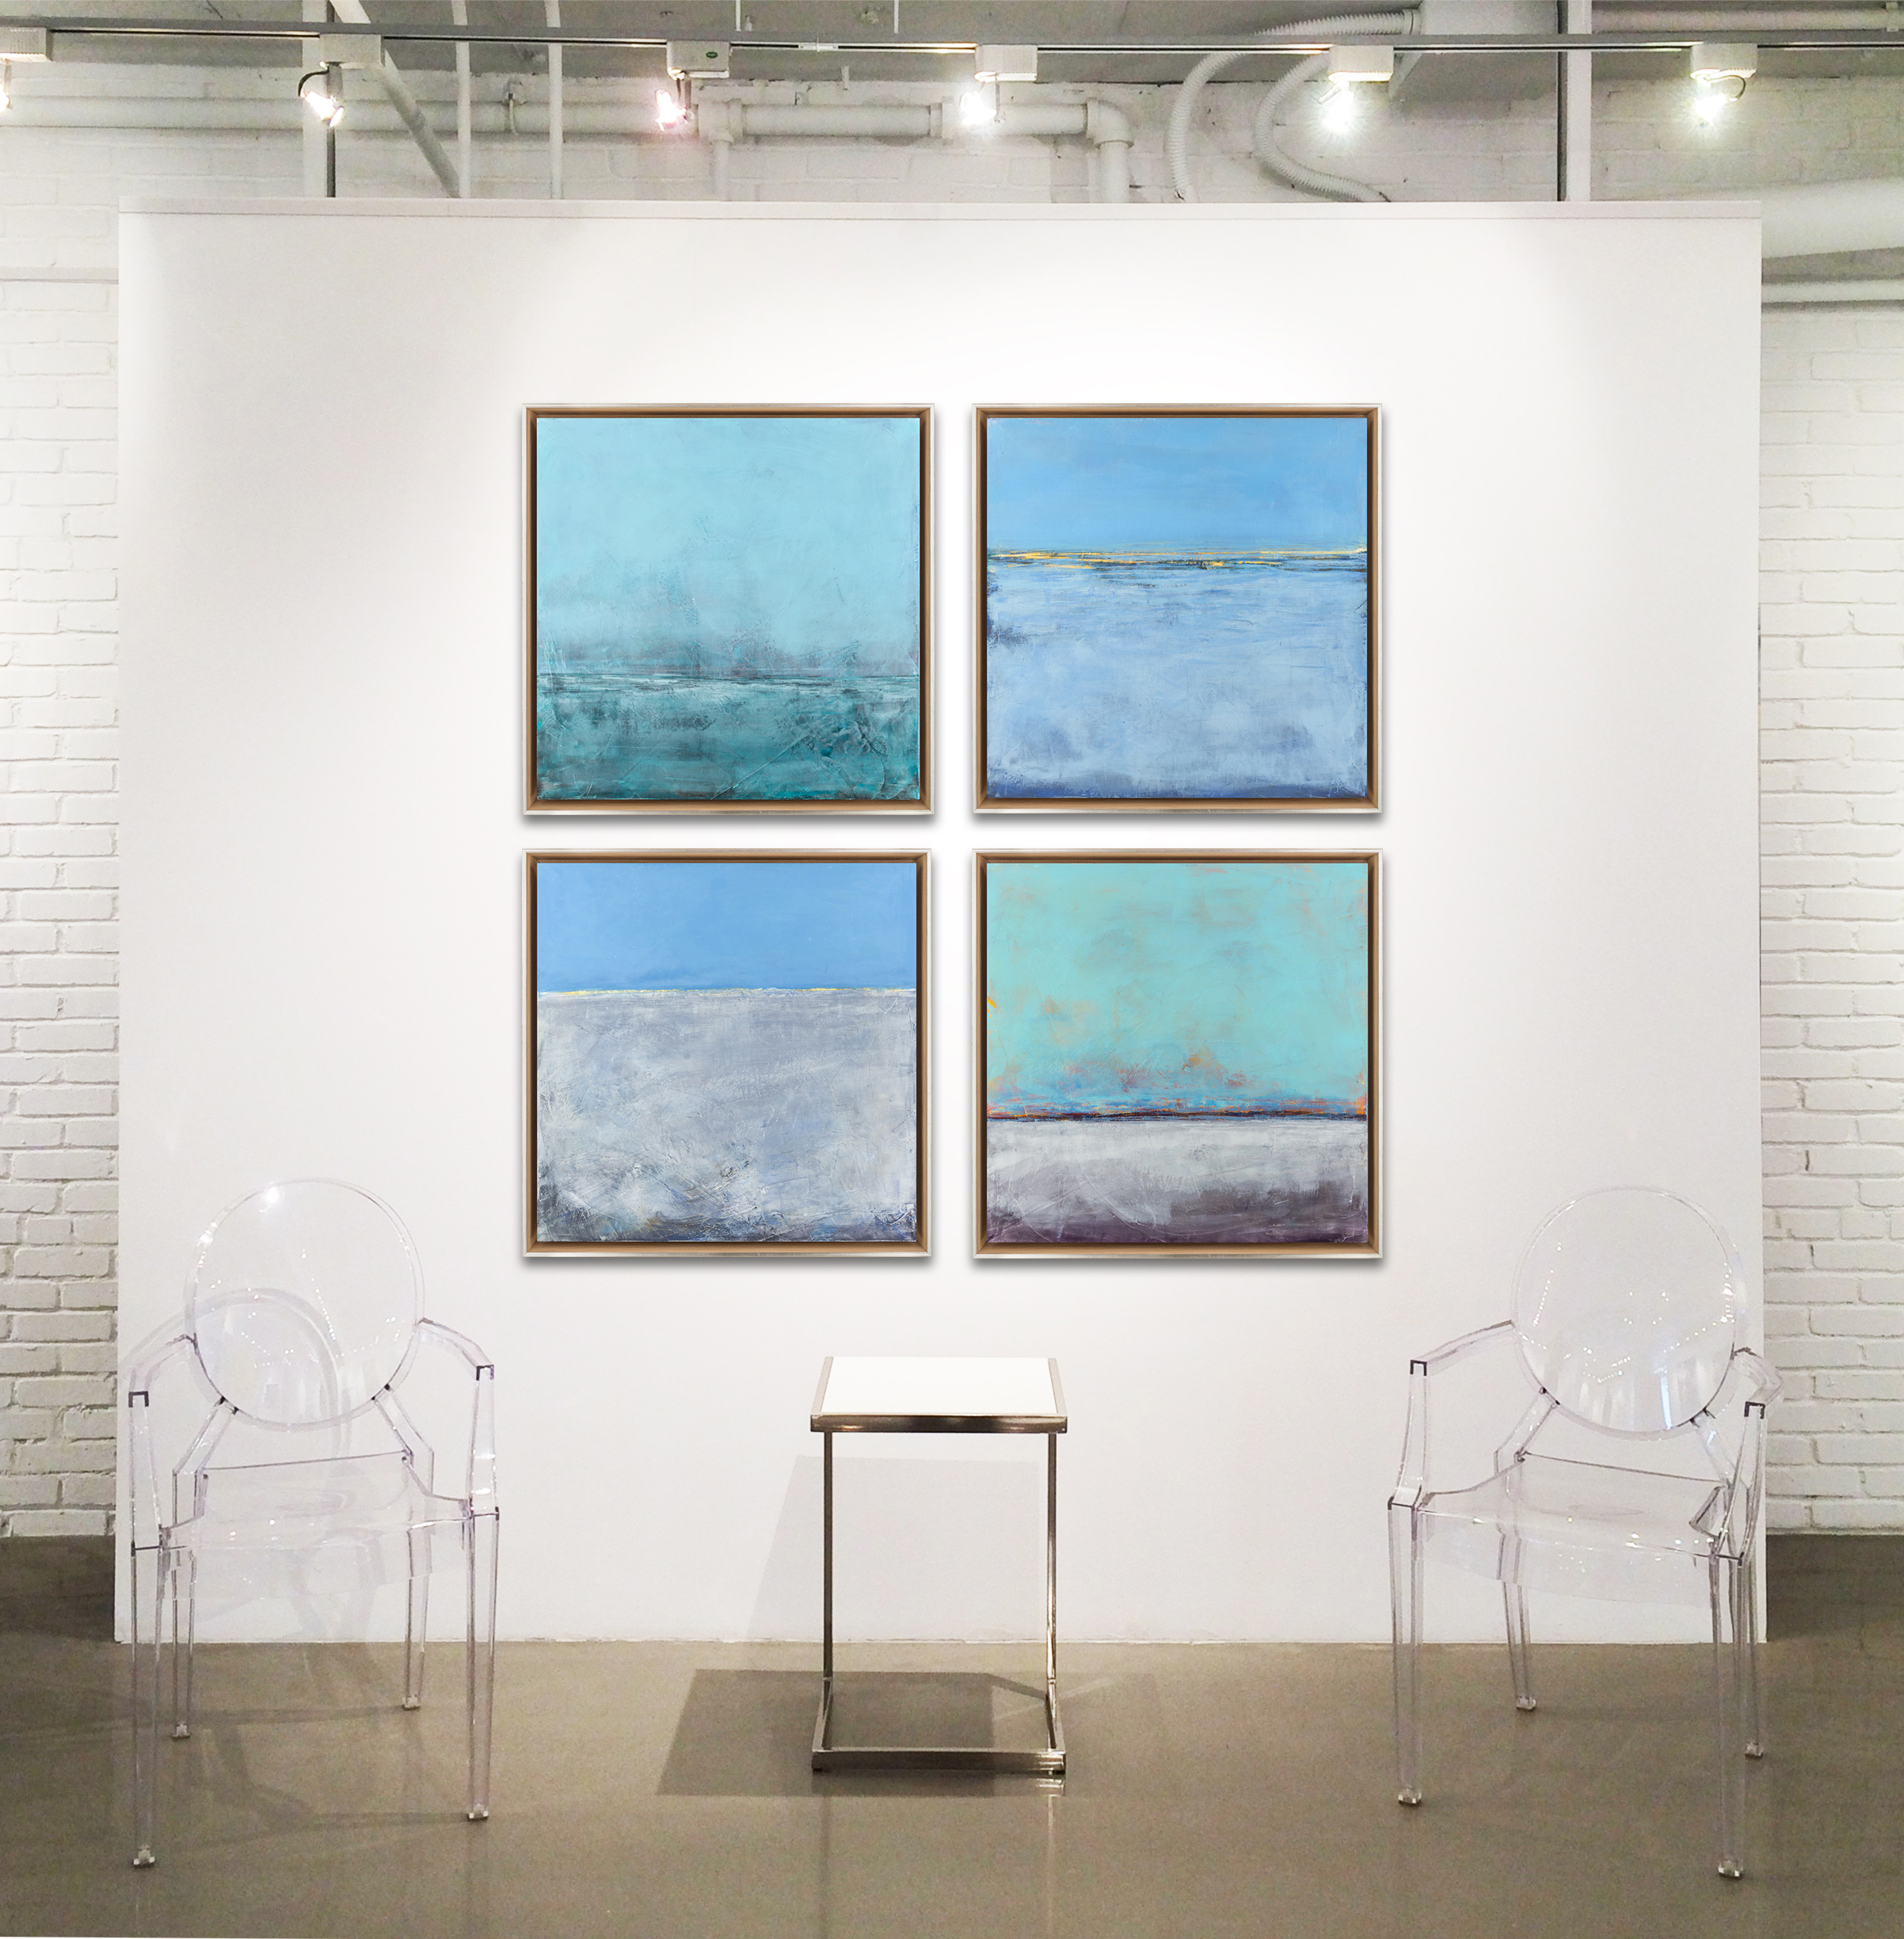 Erickson, "All to Myself" series, Oil and Wax on Panel, 24 x 24 in. each